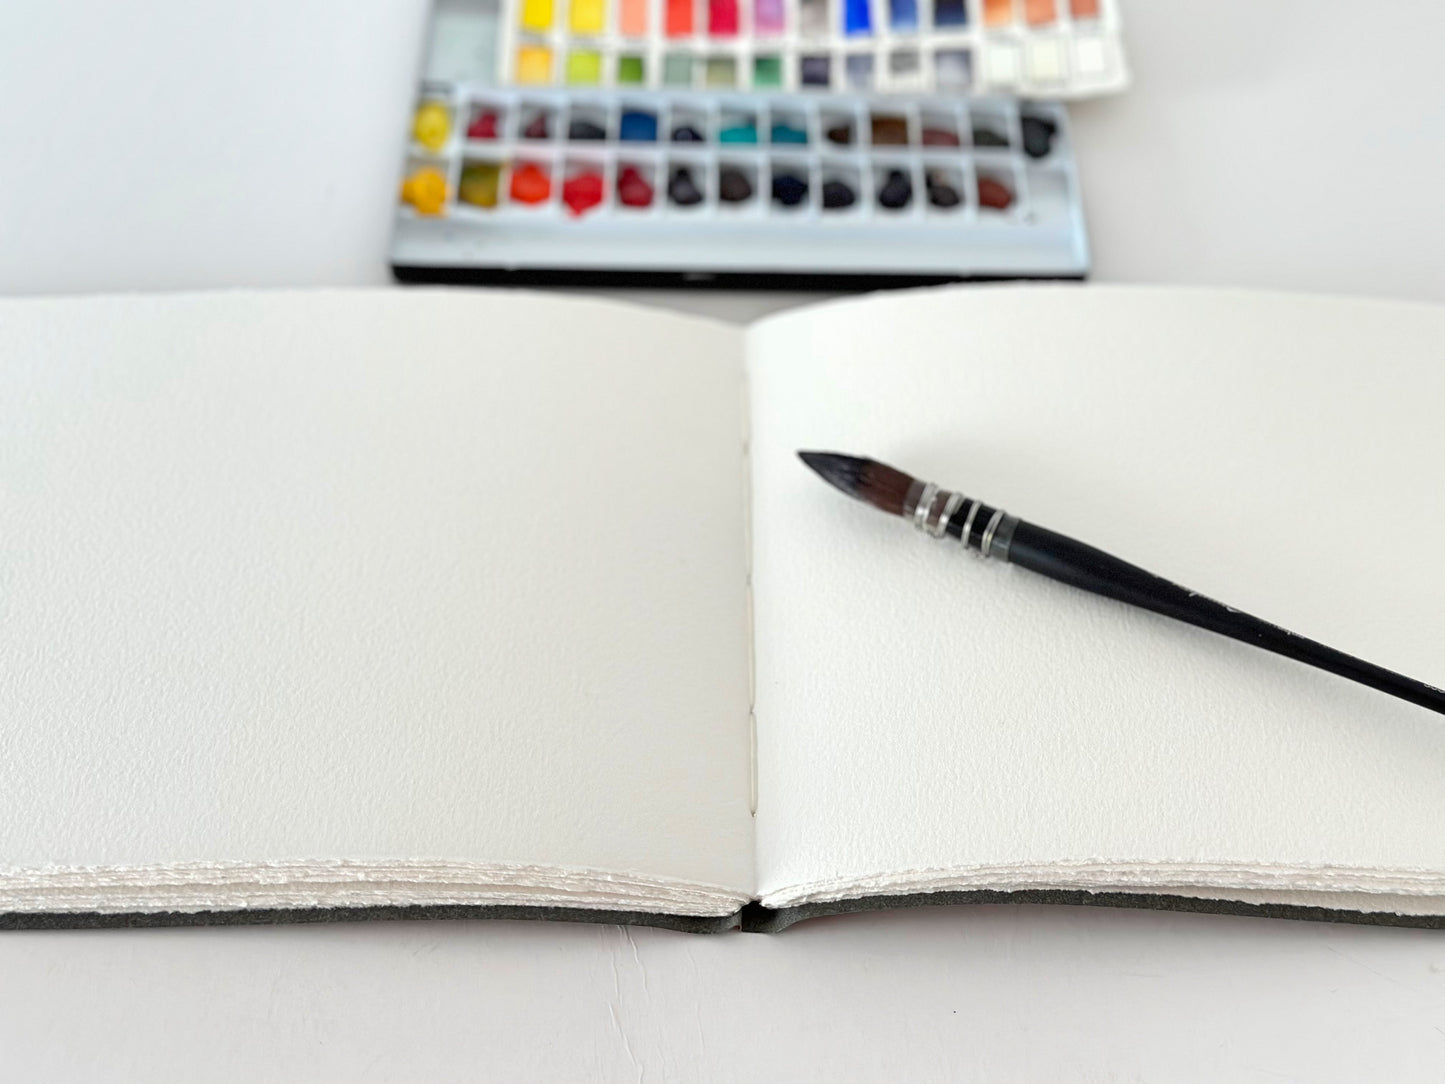 Large Pl Leather Sketchbook with 140lb Cotton Watercolor Paper in Landscape, Softcover Travel Journal, Arches Fine Arts Paper Cold Pressed